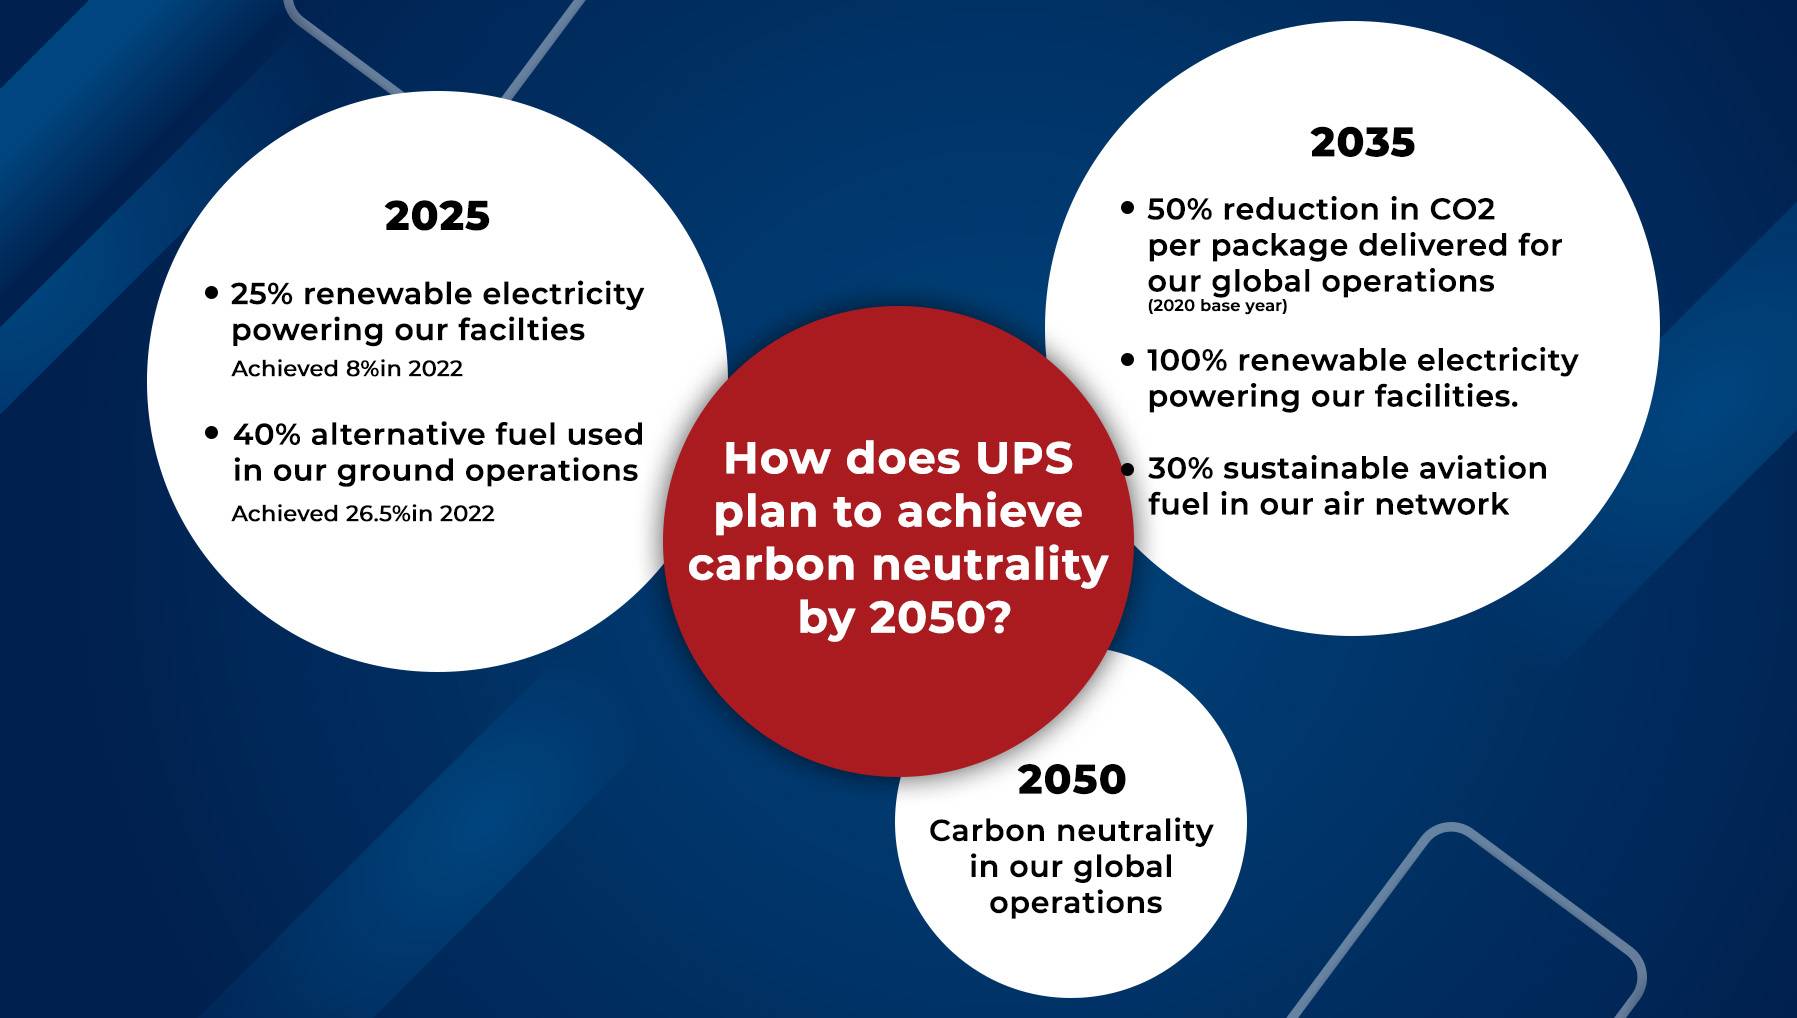 How does UPS plan to achieve carbon neutrality by 2050?